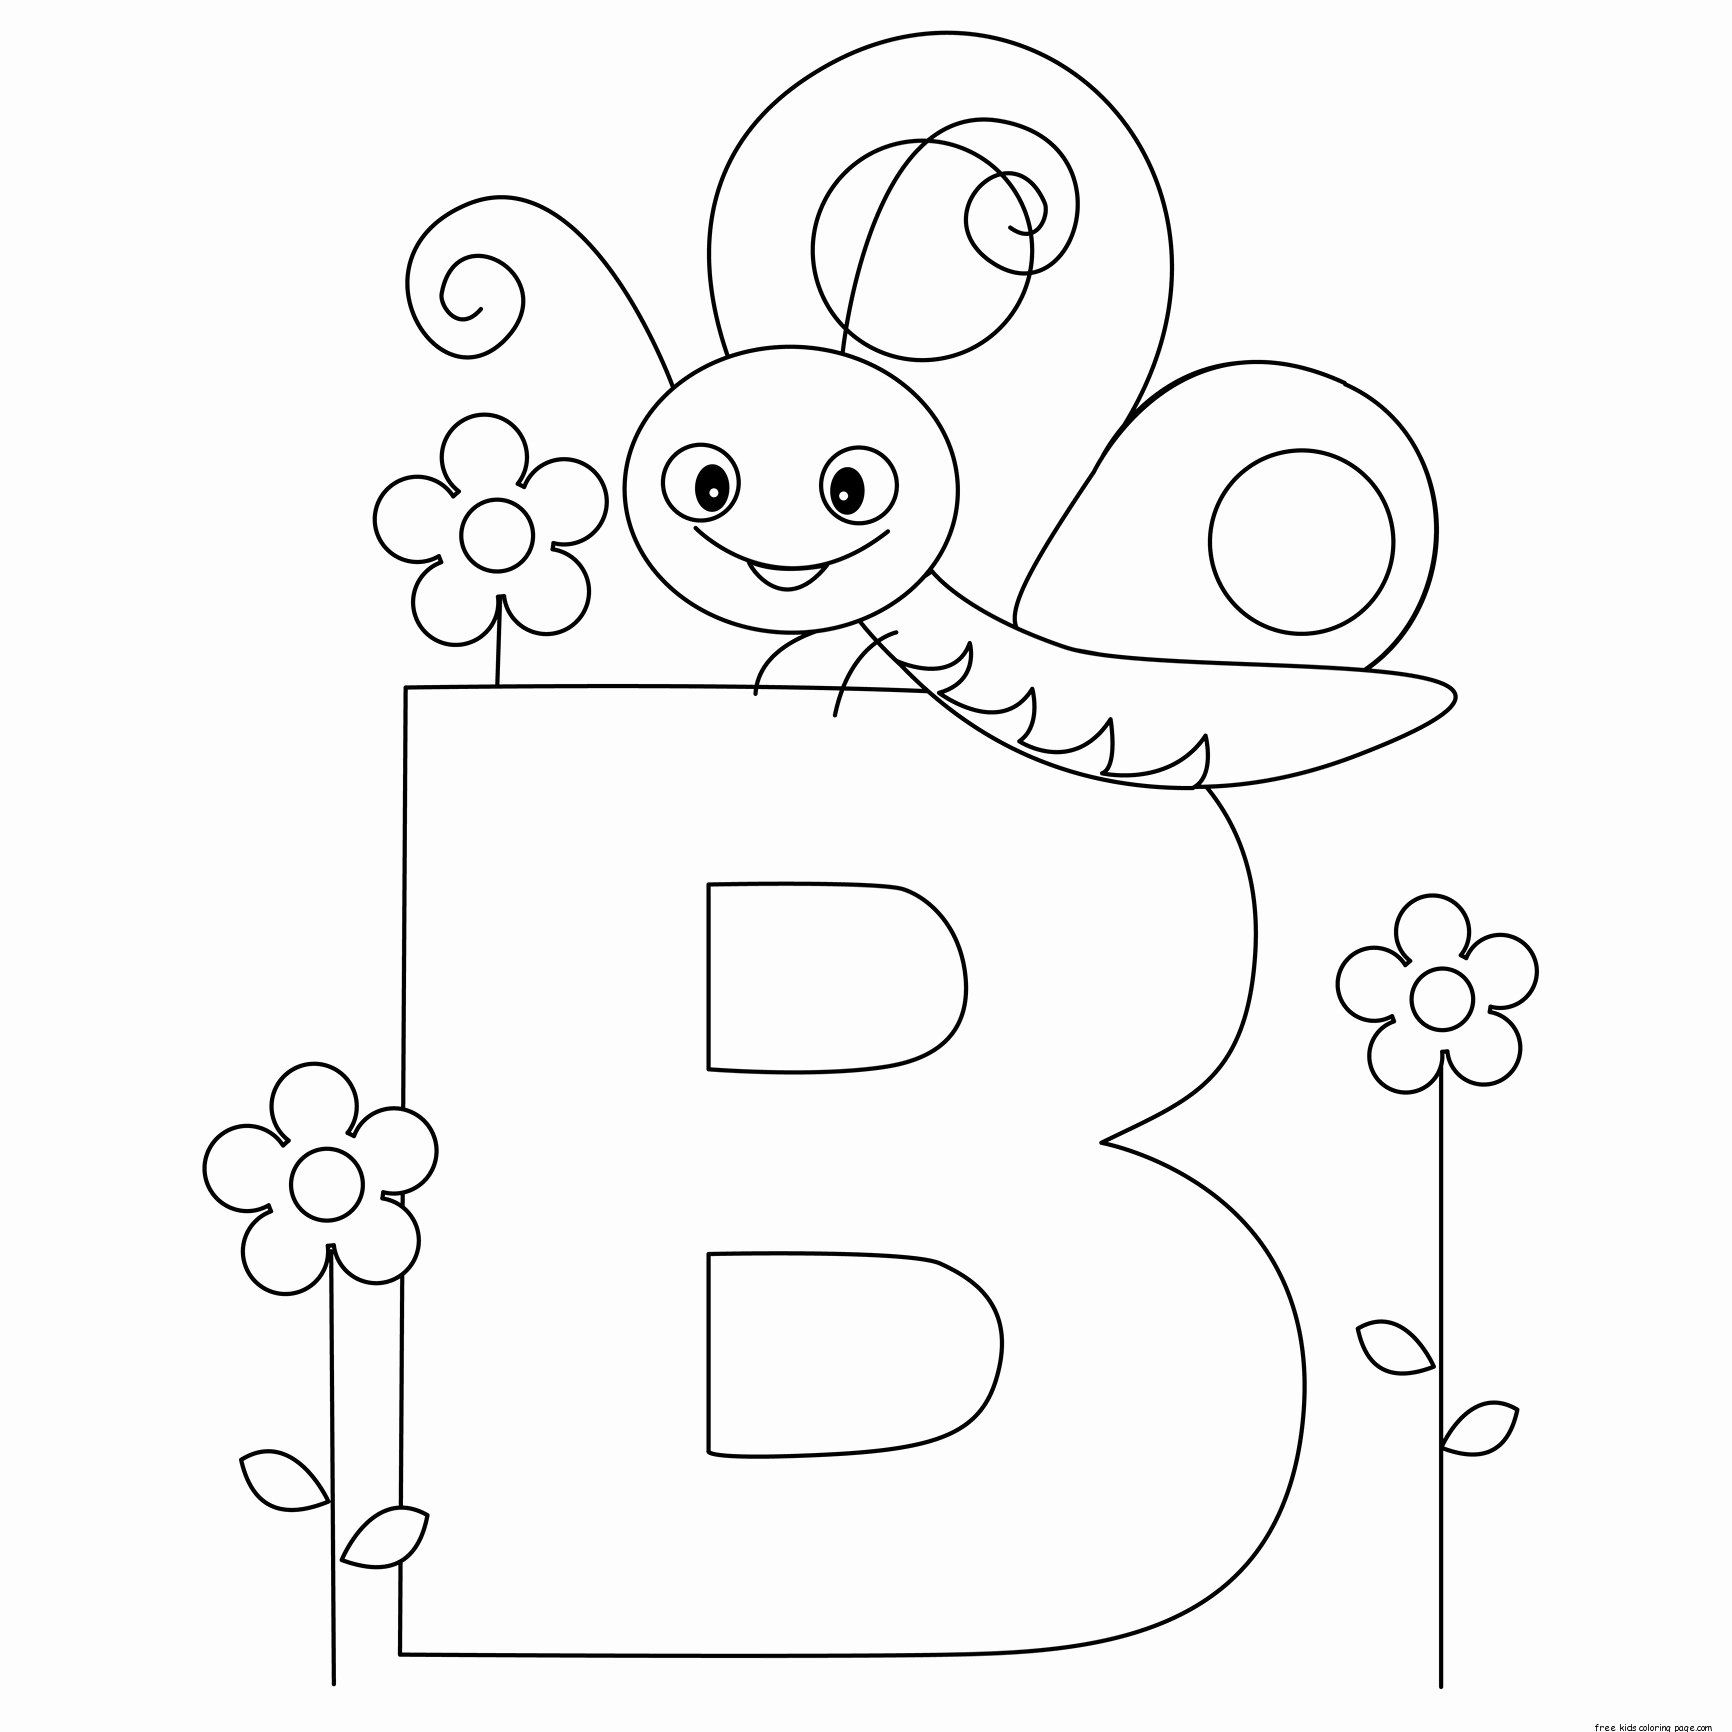 Printable Alphabet Coloring Pages | Haramiran for Alphabet Coloring Worksheets For Preschoolers